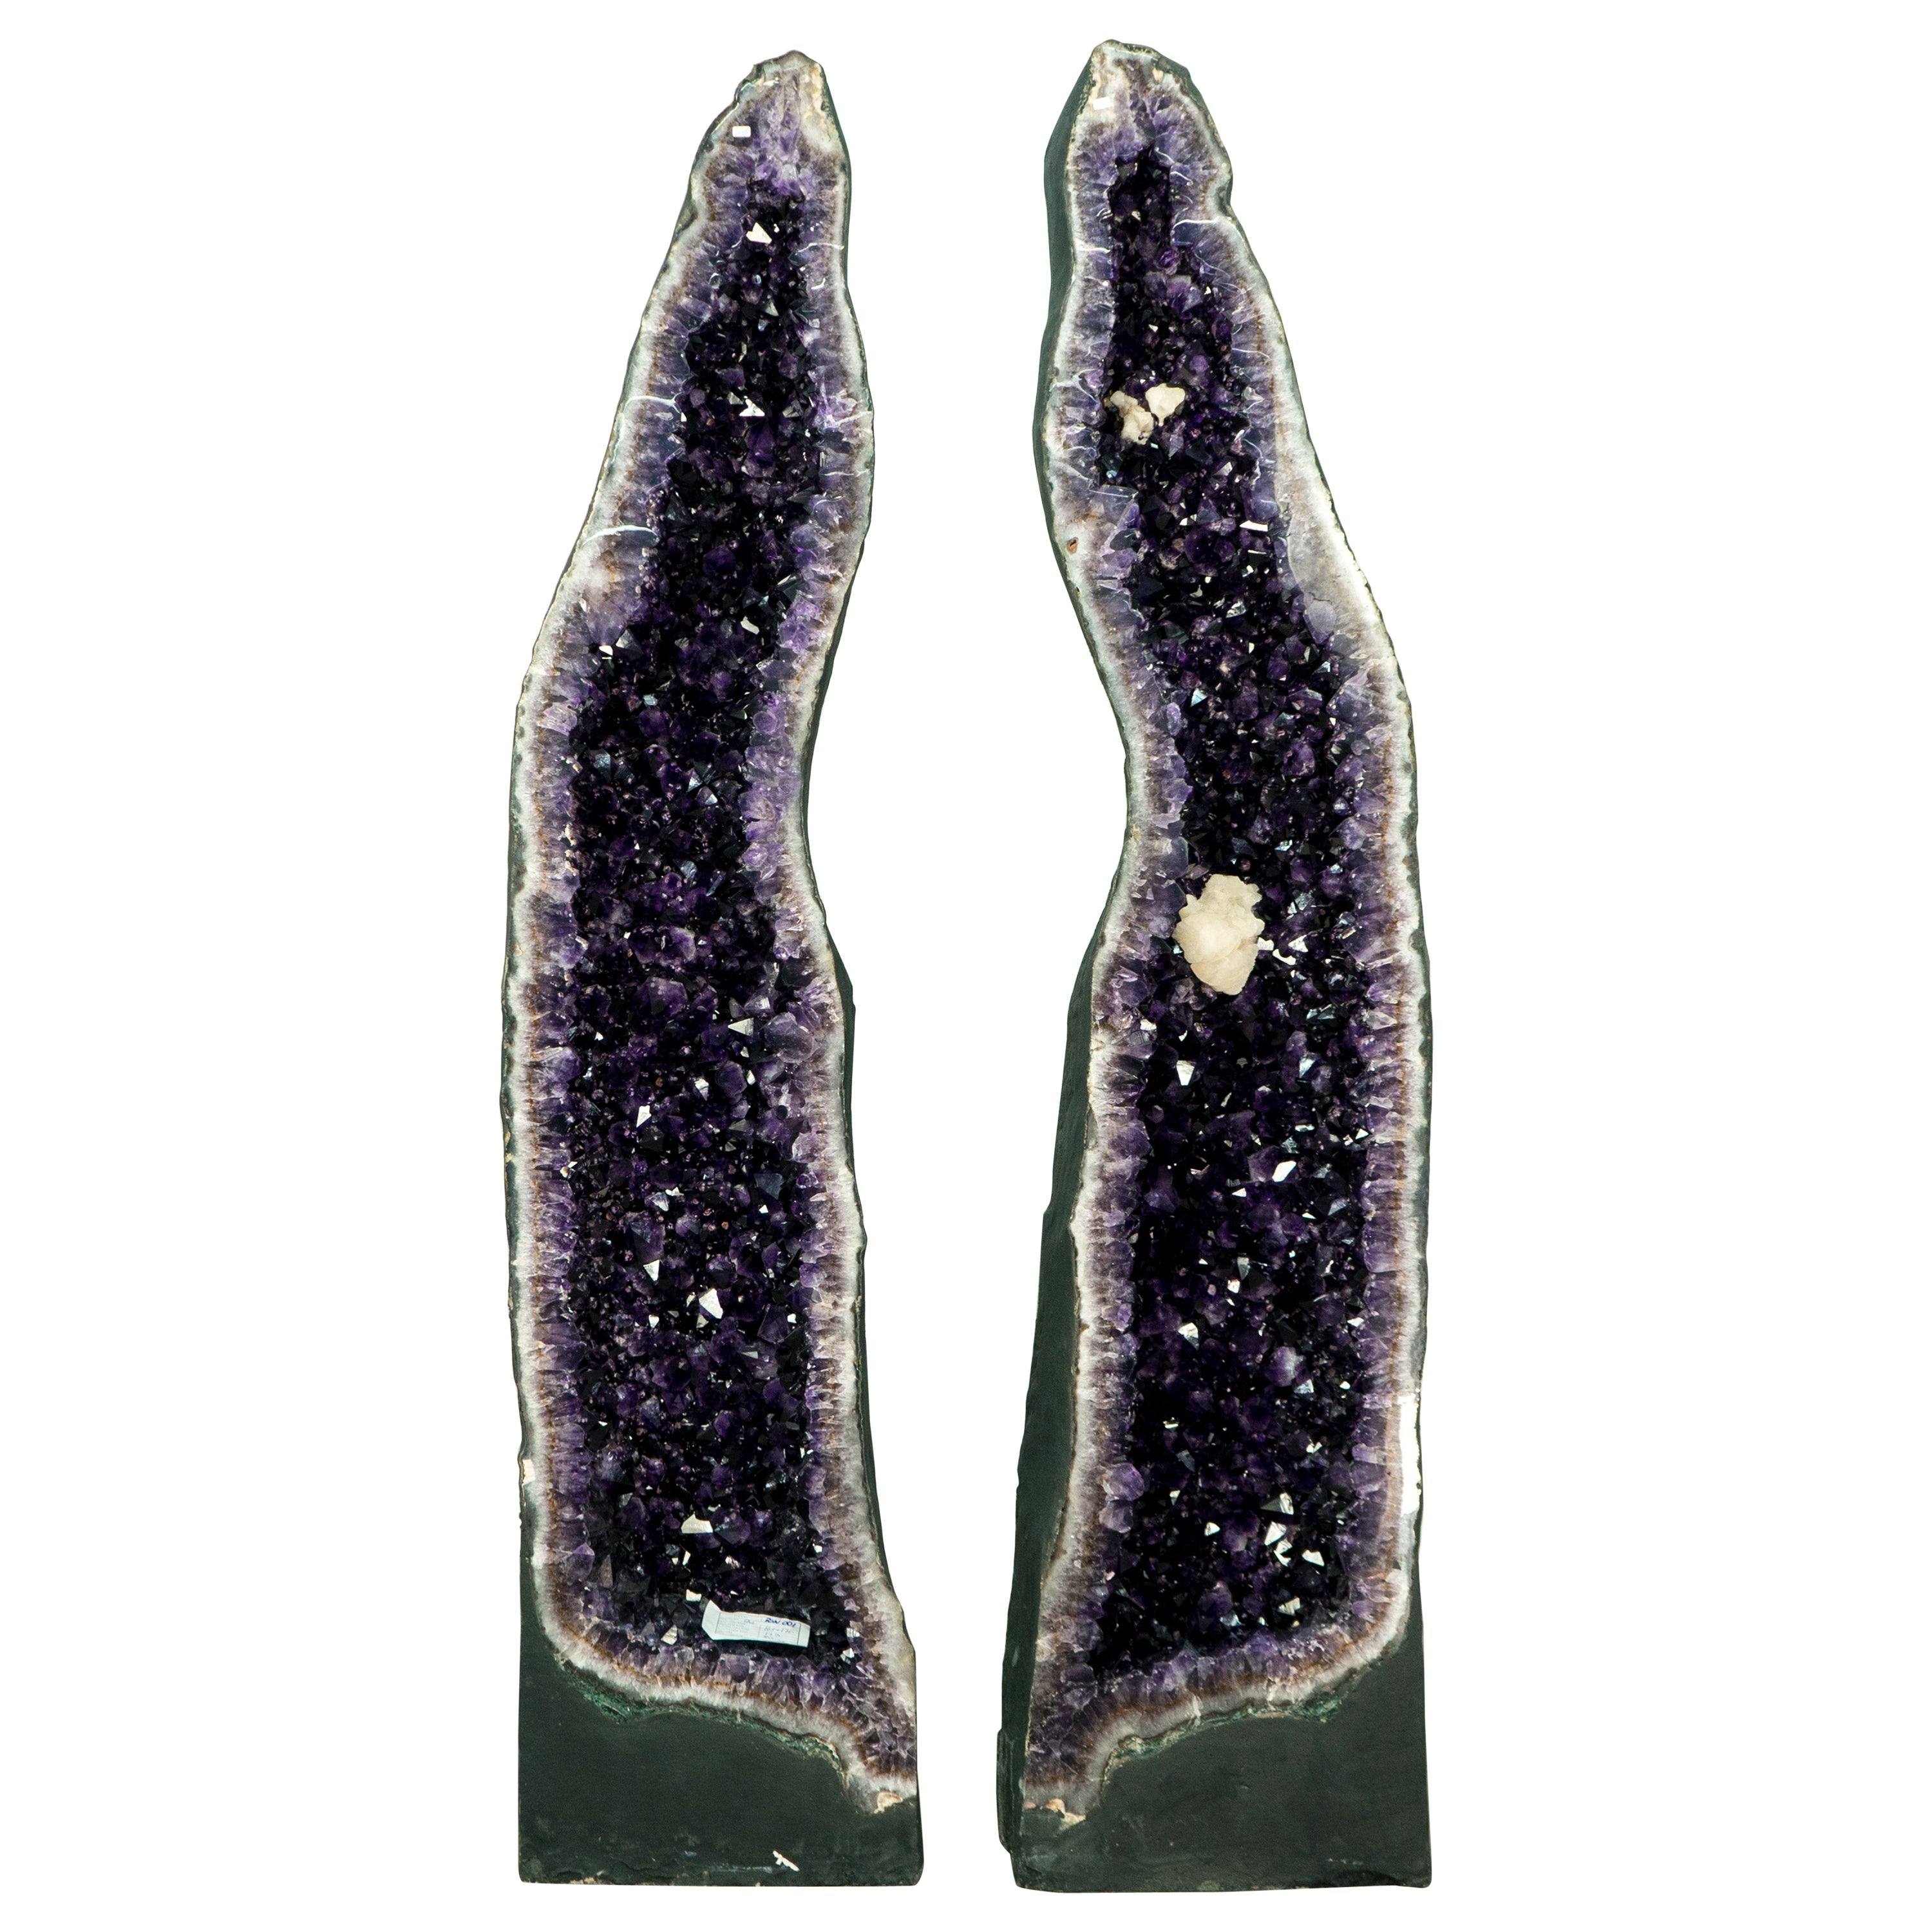 X-Large Tall Amethyst Cathedral Geodes Pair - 5.7 Ft, 750 Lb, with AAA Druzy